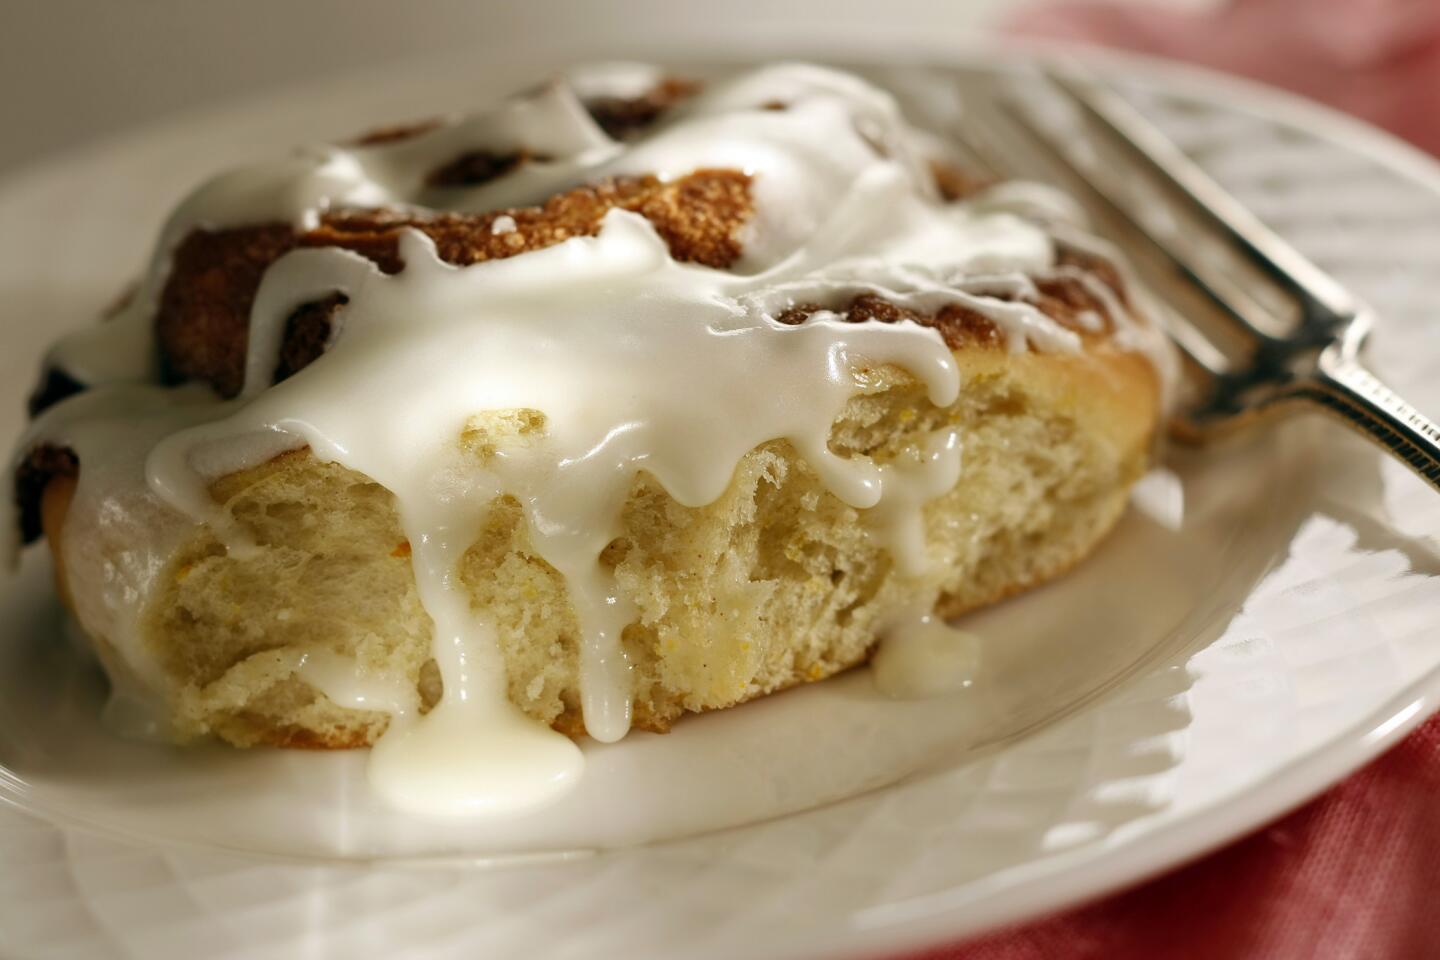 Nothing says "I love you" like fresh-from-the-oven cinnamon rolls.